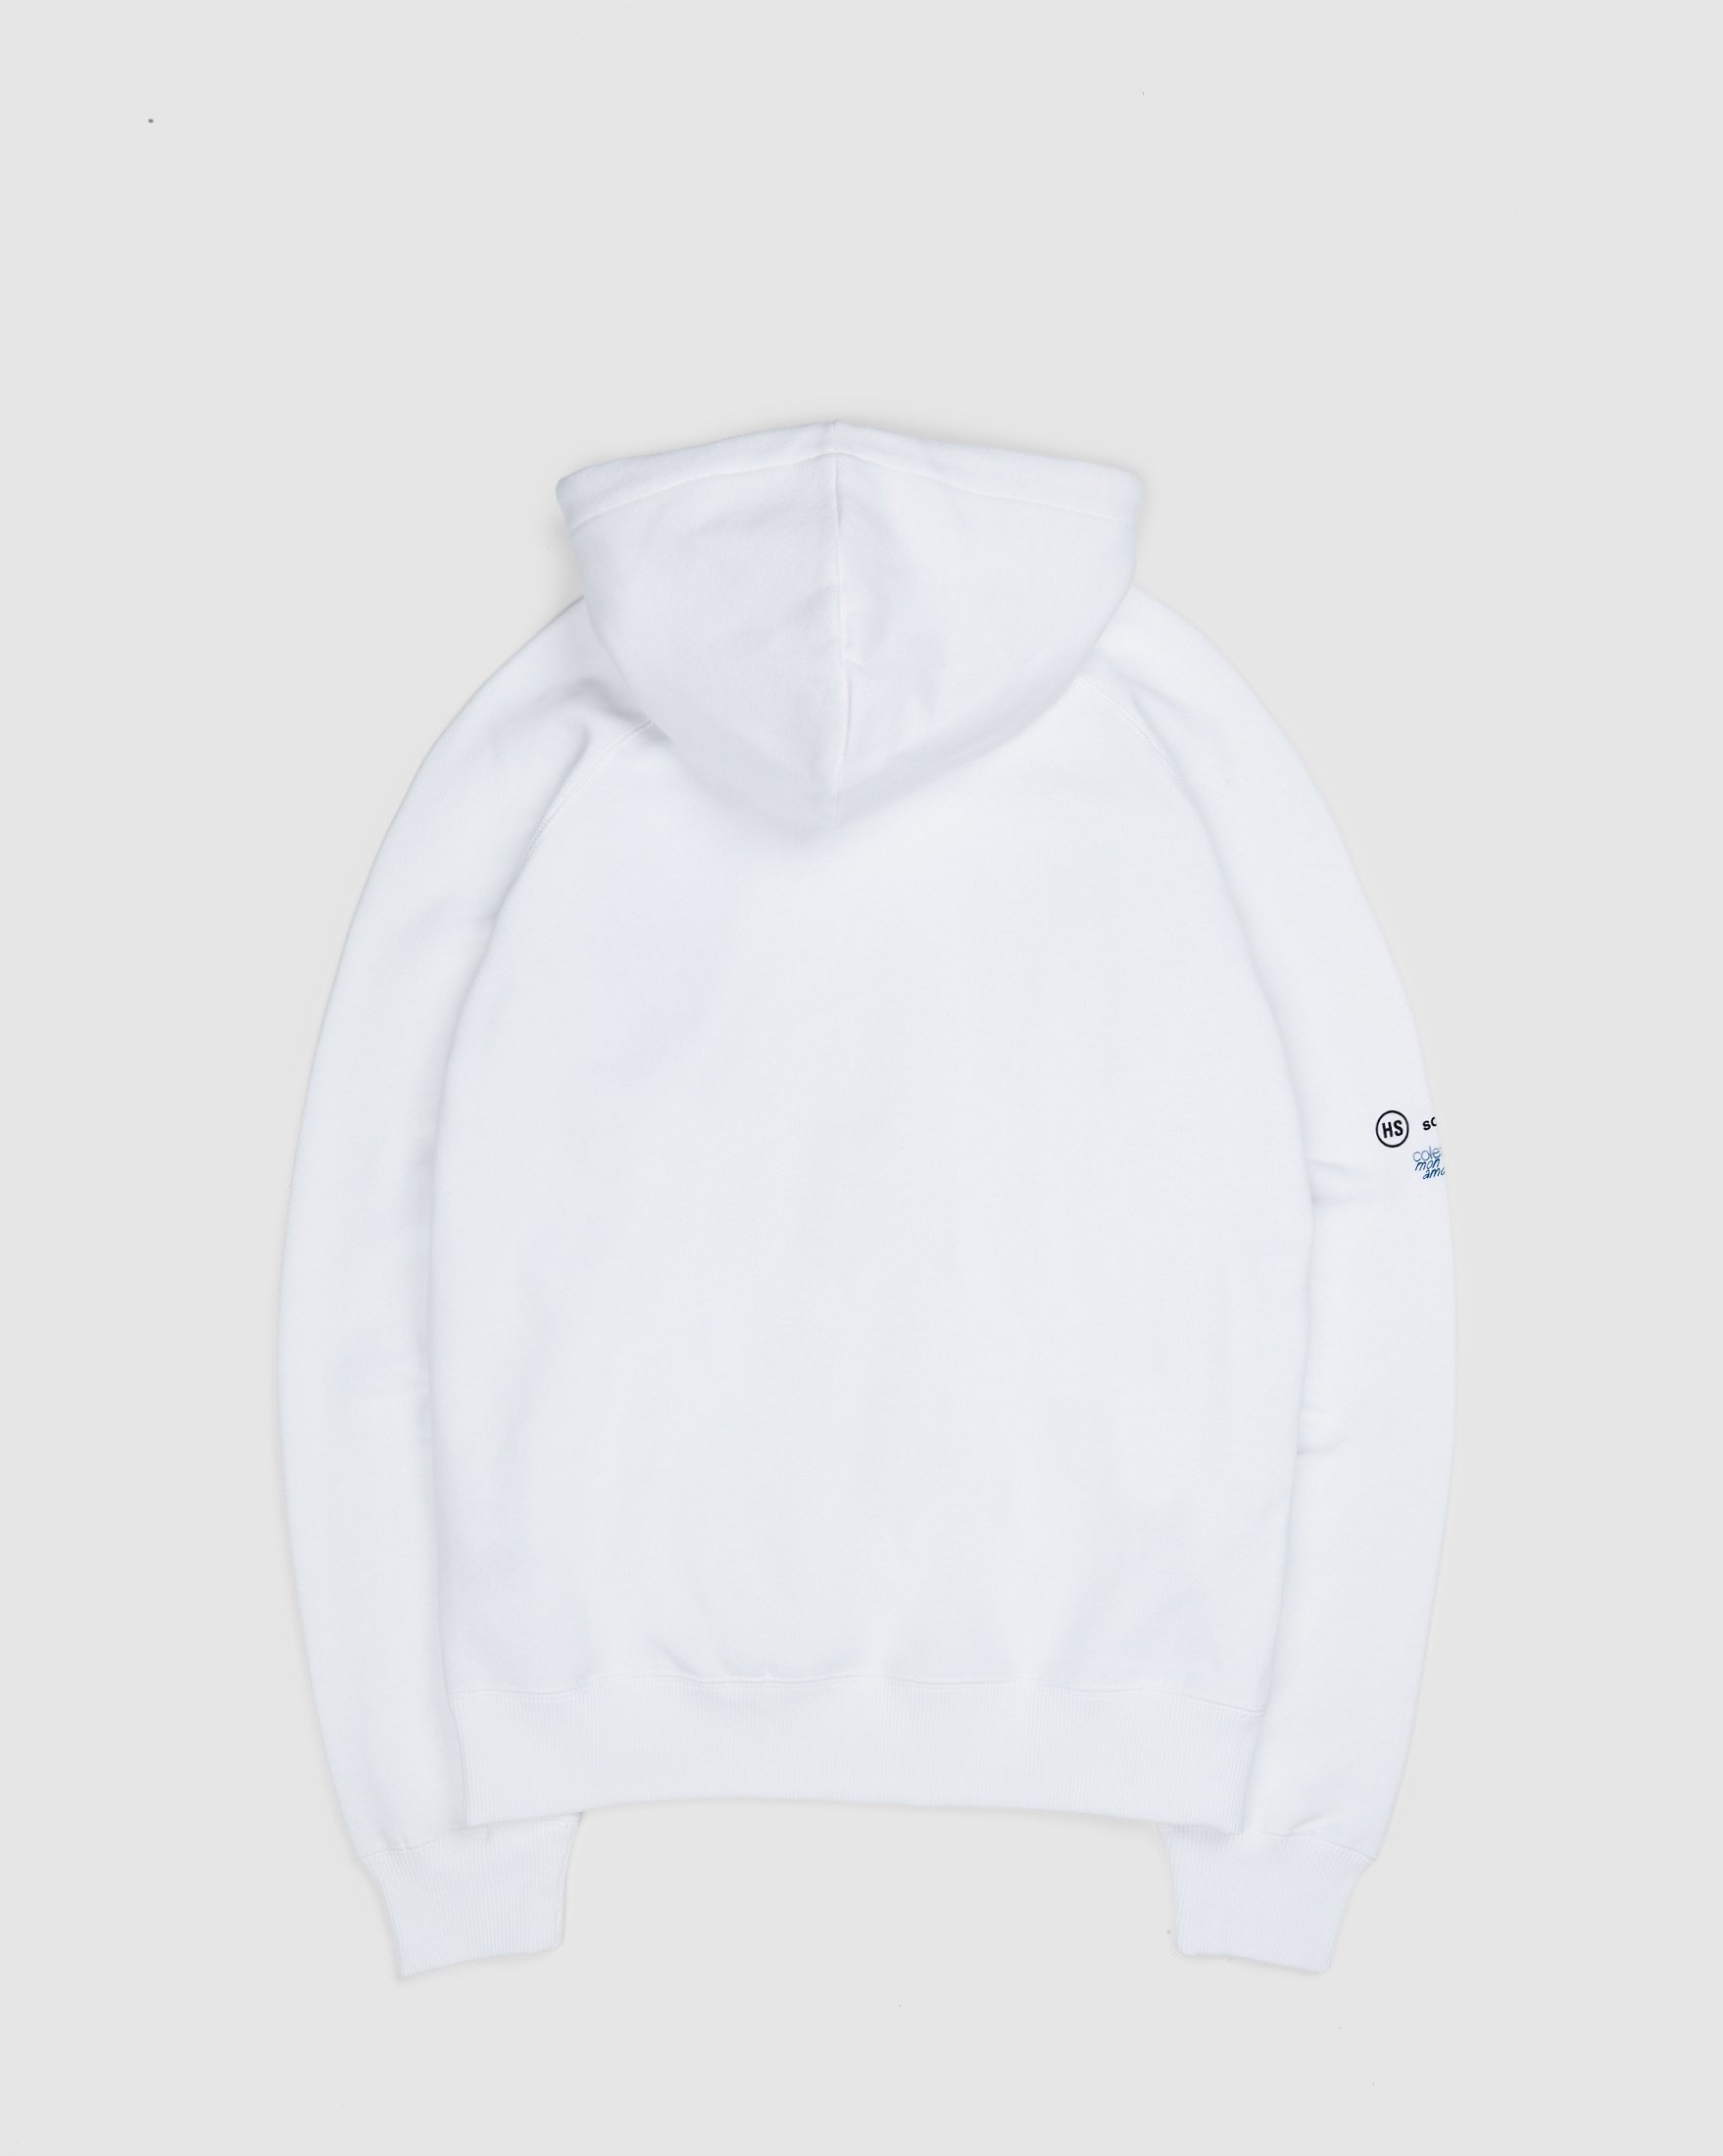 Colette Mon Amour x Soulland – Snoopy Bed White Hoodie - Hoodies - White - Image 2